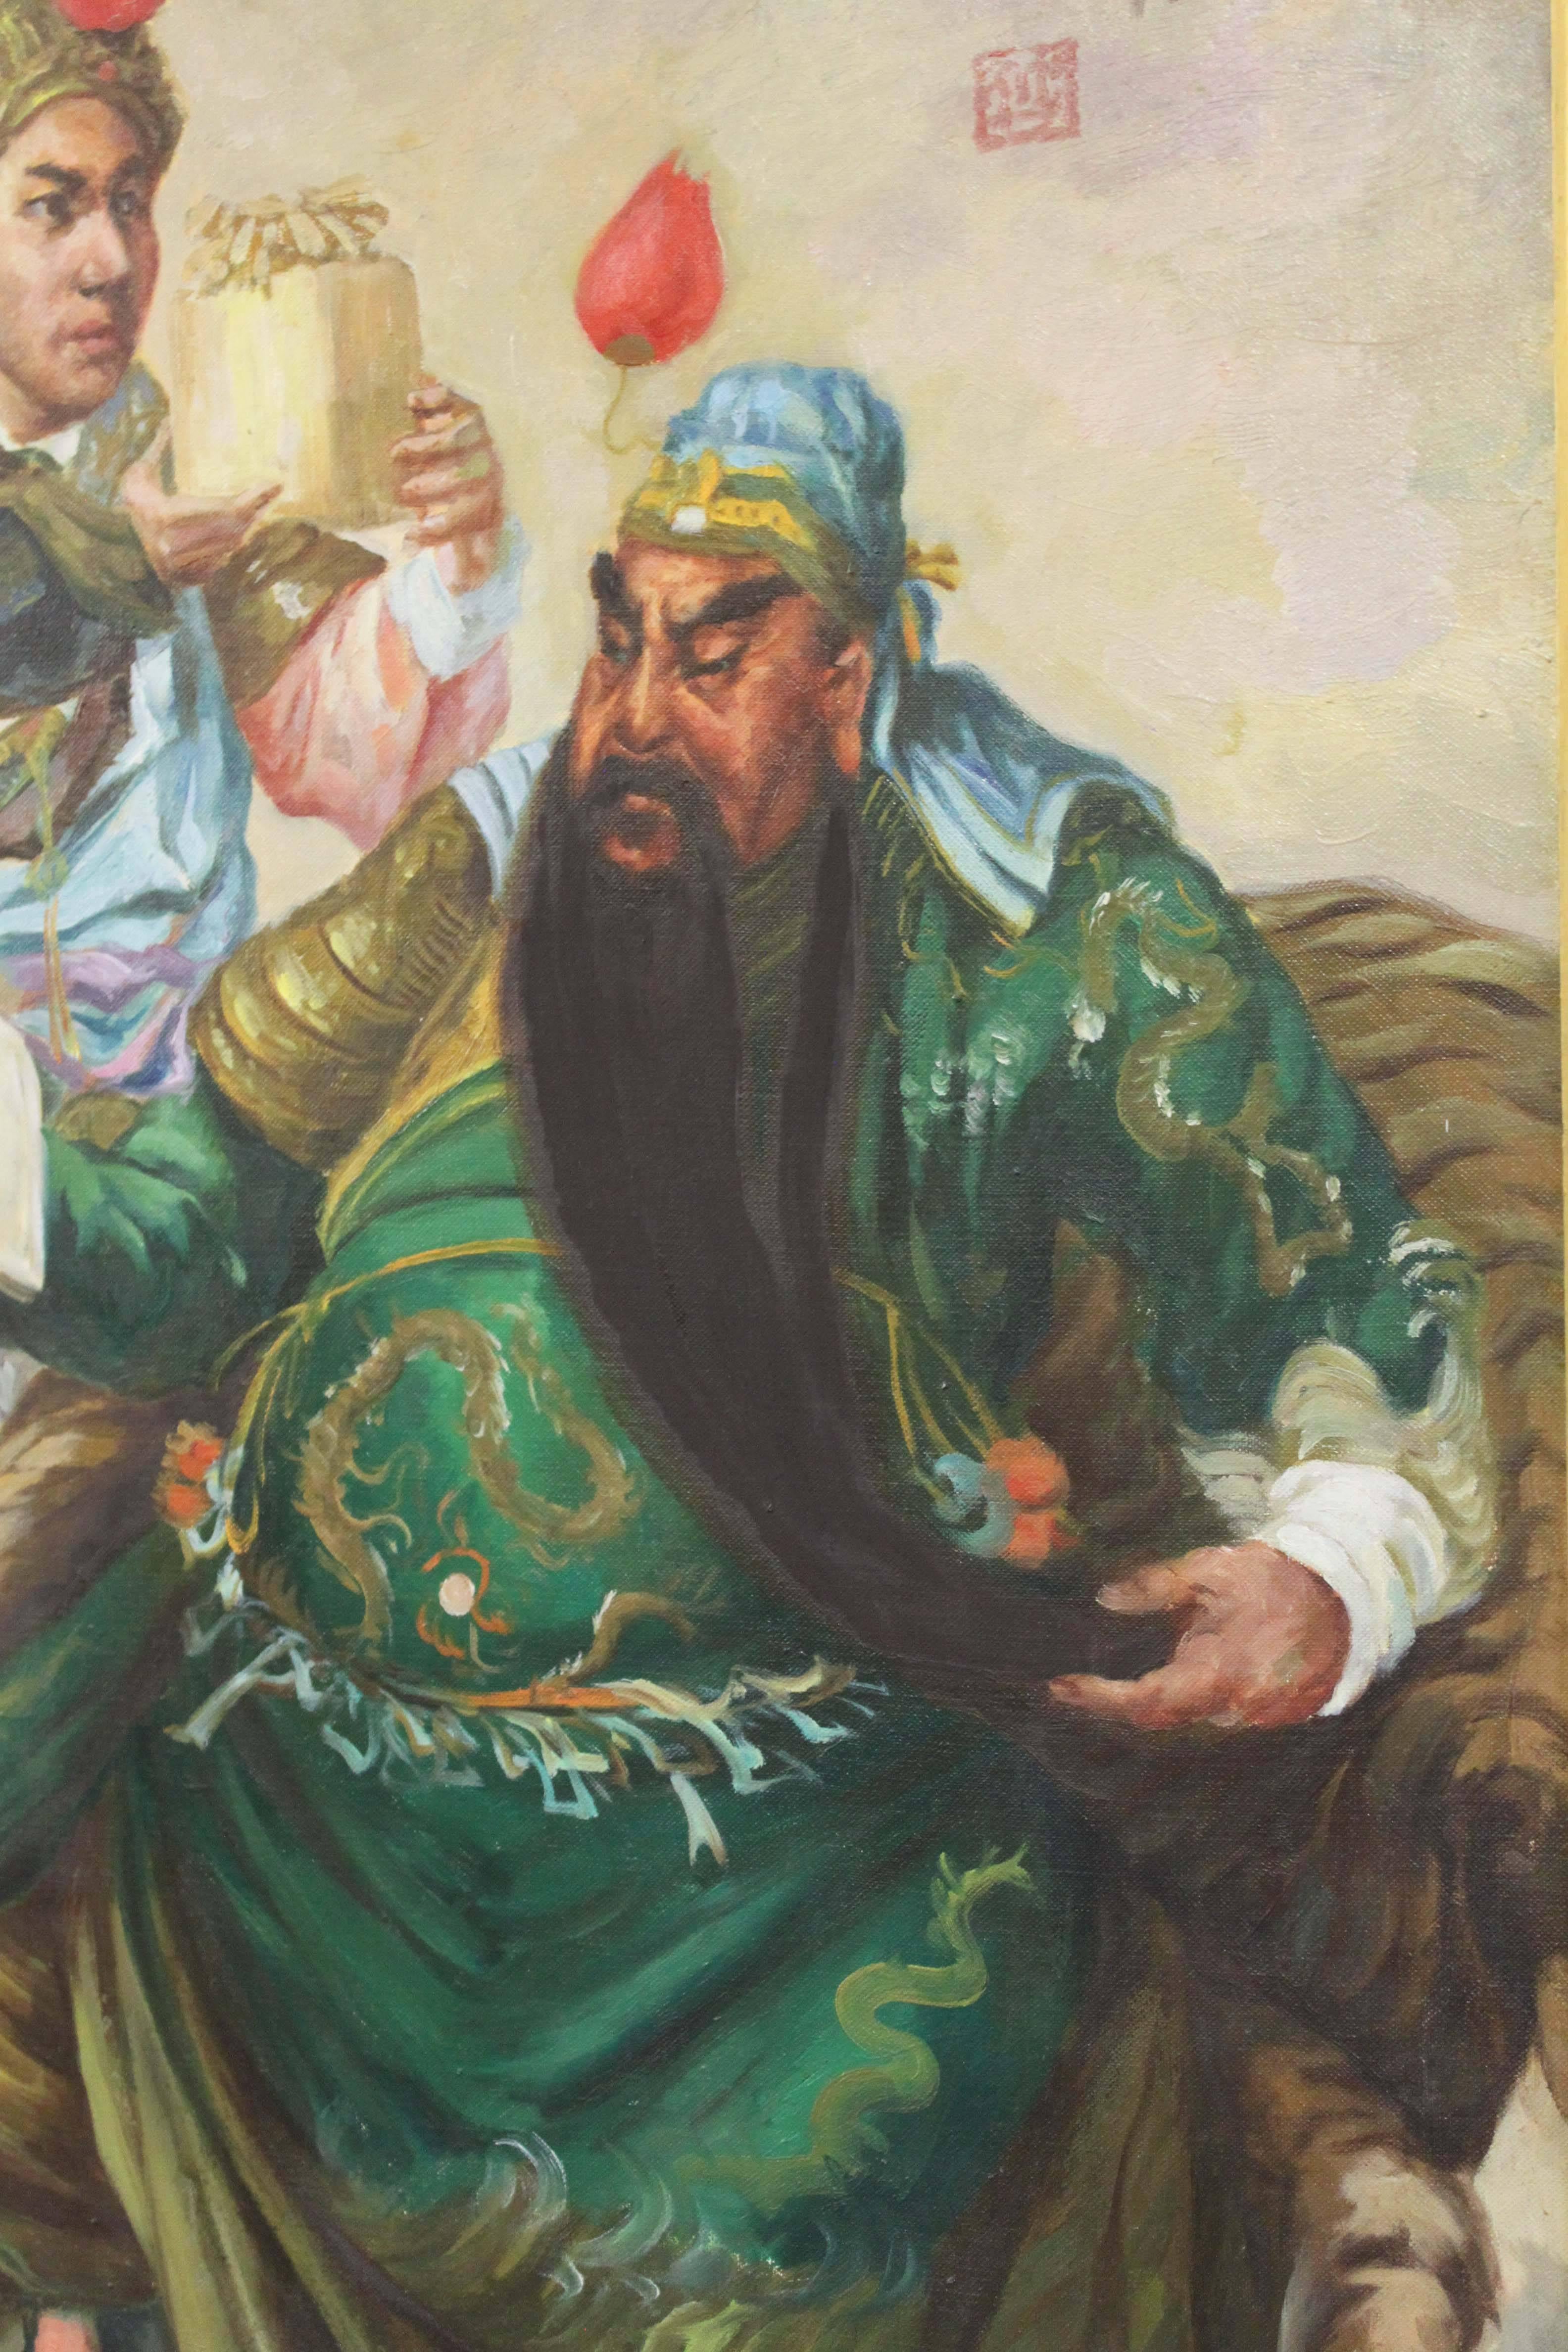 A large oil painting of Guan Yu, a general under the warlord Liu Bei during the late Eastern Han Dynasty and Three Kingdoms era of China. He played a significant role in the civil war that led to the collapse of the Han dynasty and the establishment